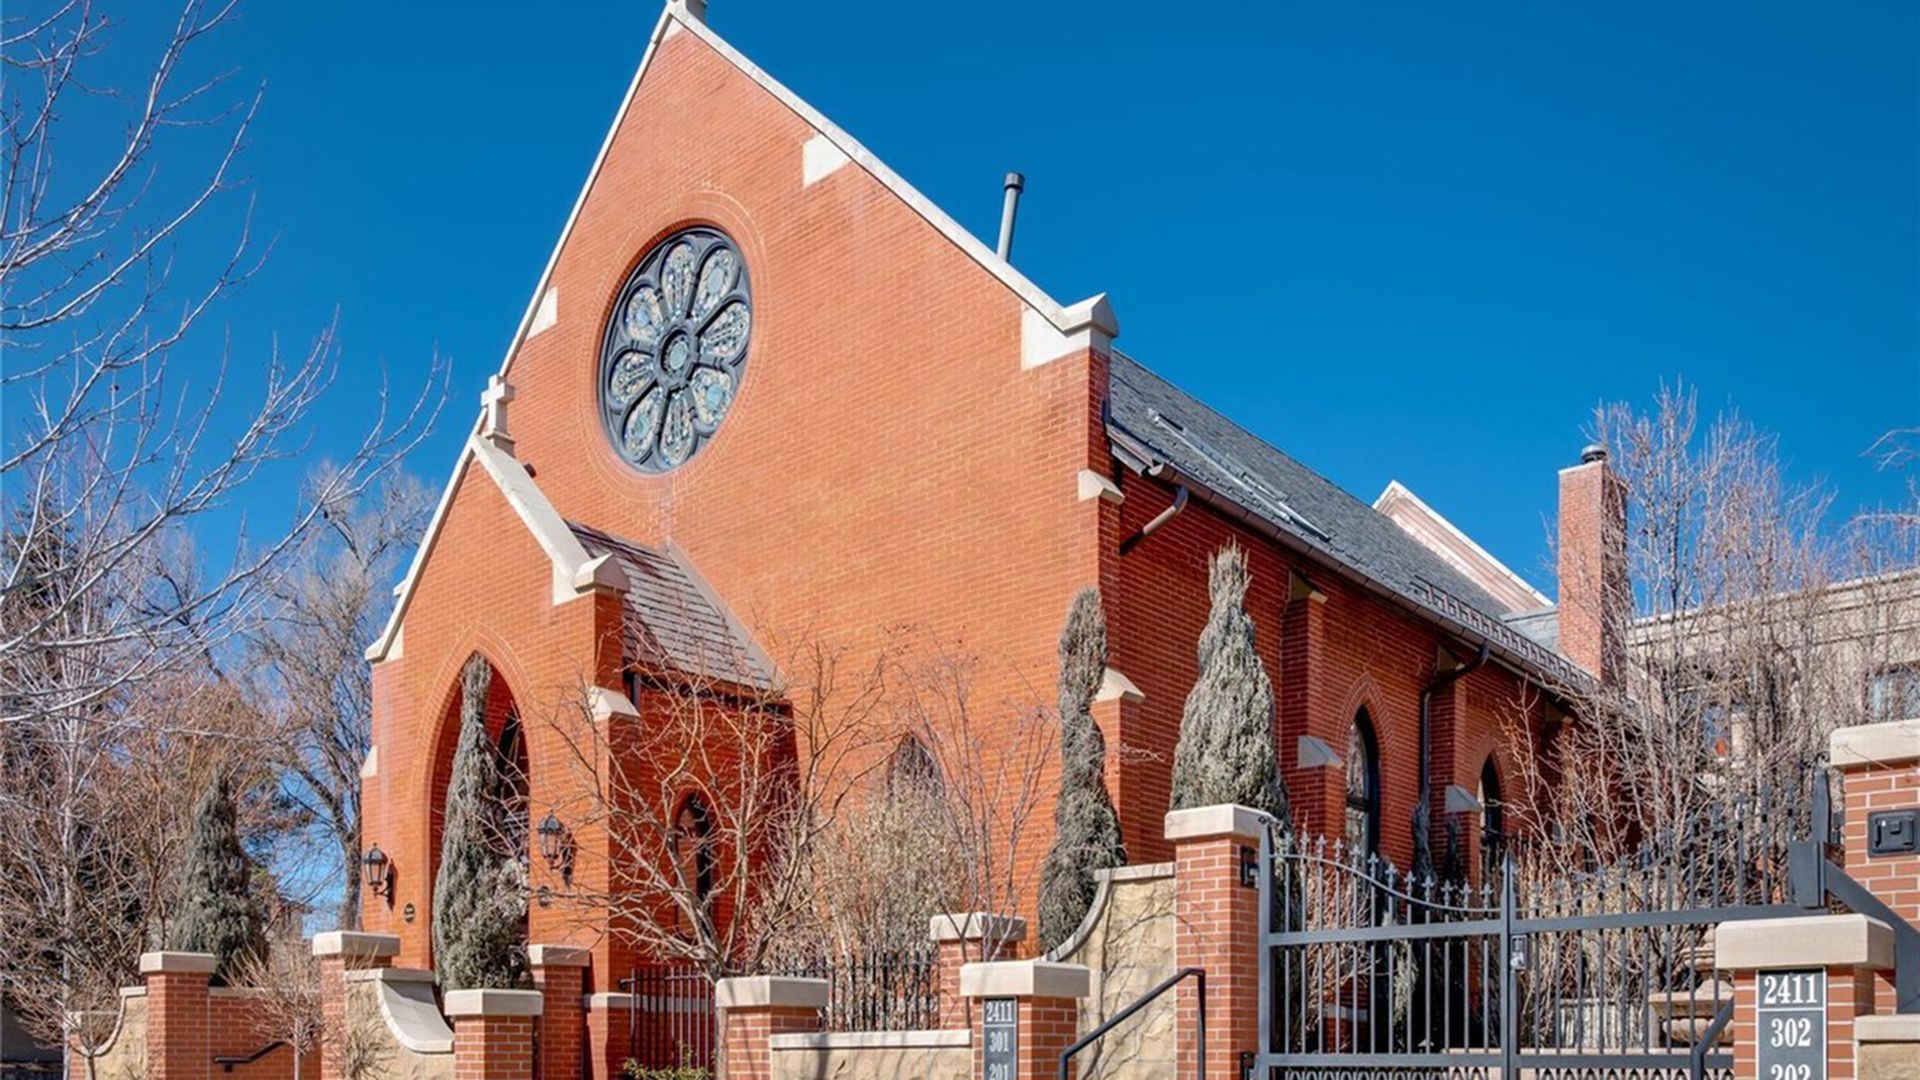 A Denver church building was converted into an expansive condo in 2008. Now it's on the market for $3,695,000.